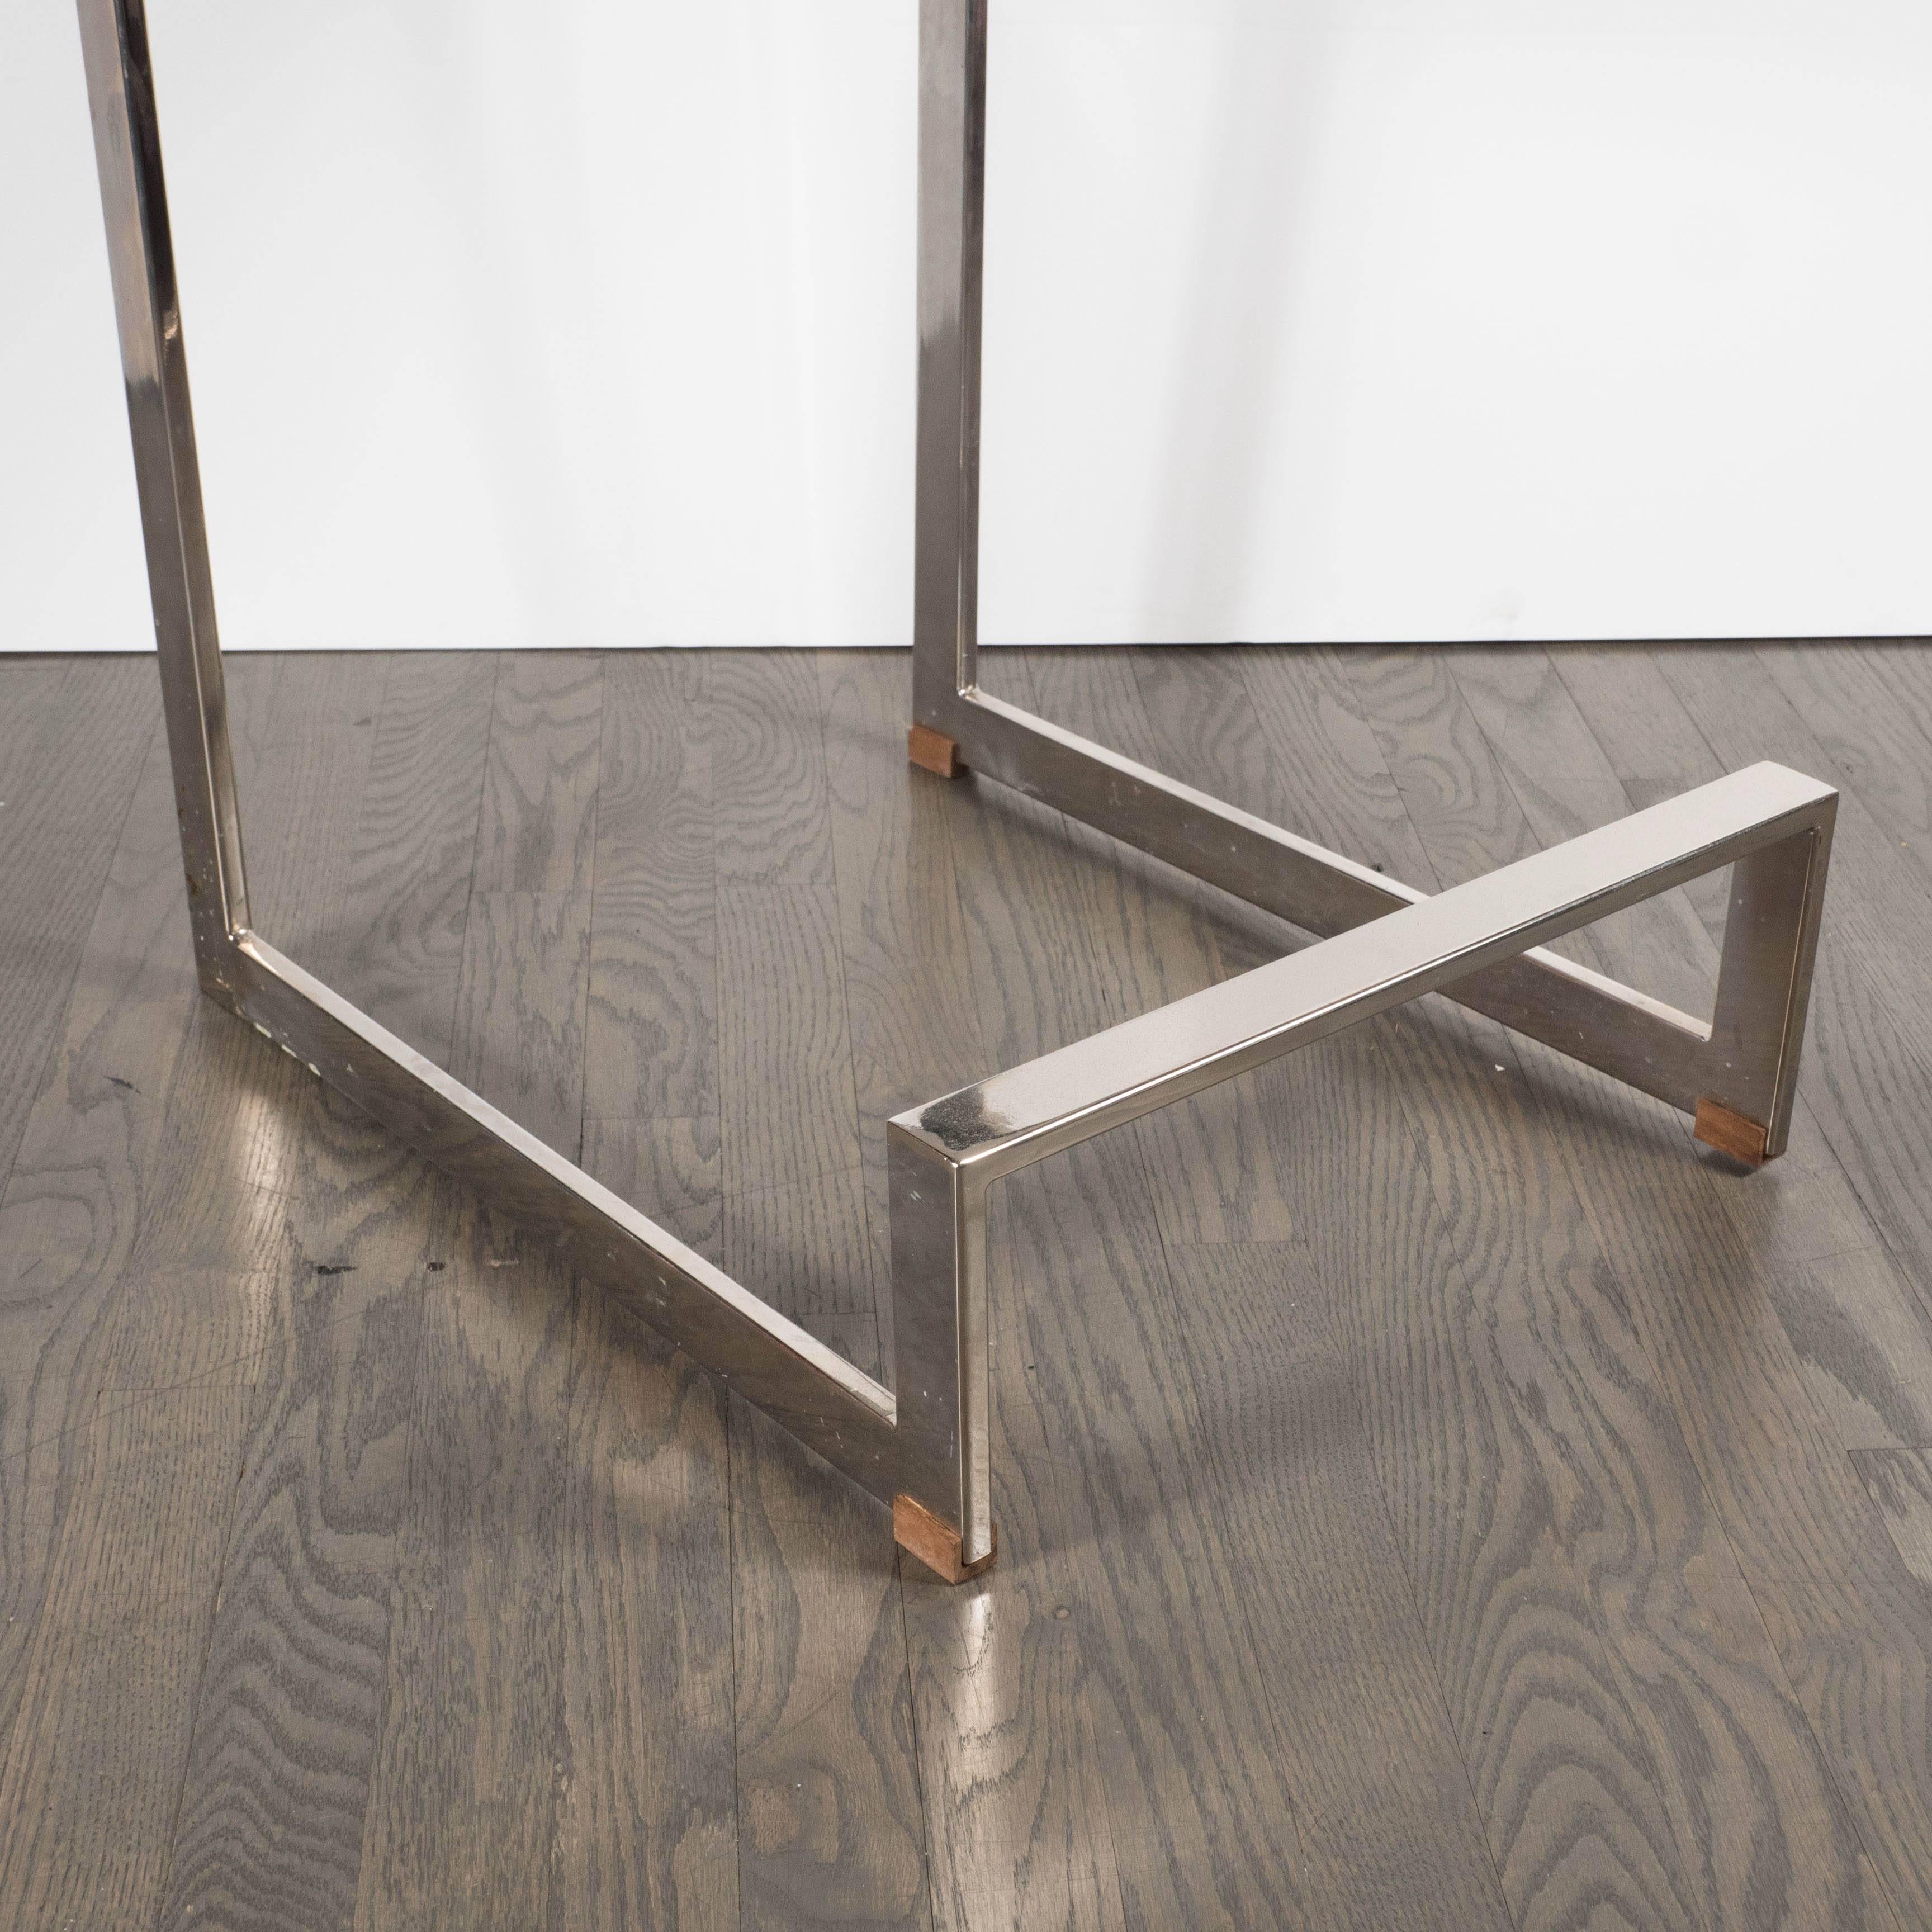 Polished Set of Four Mid-Century Modernist Cantilever Bar Stools by Milo Baughman